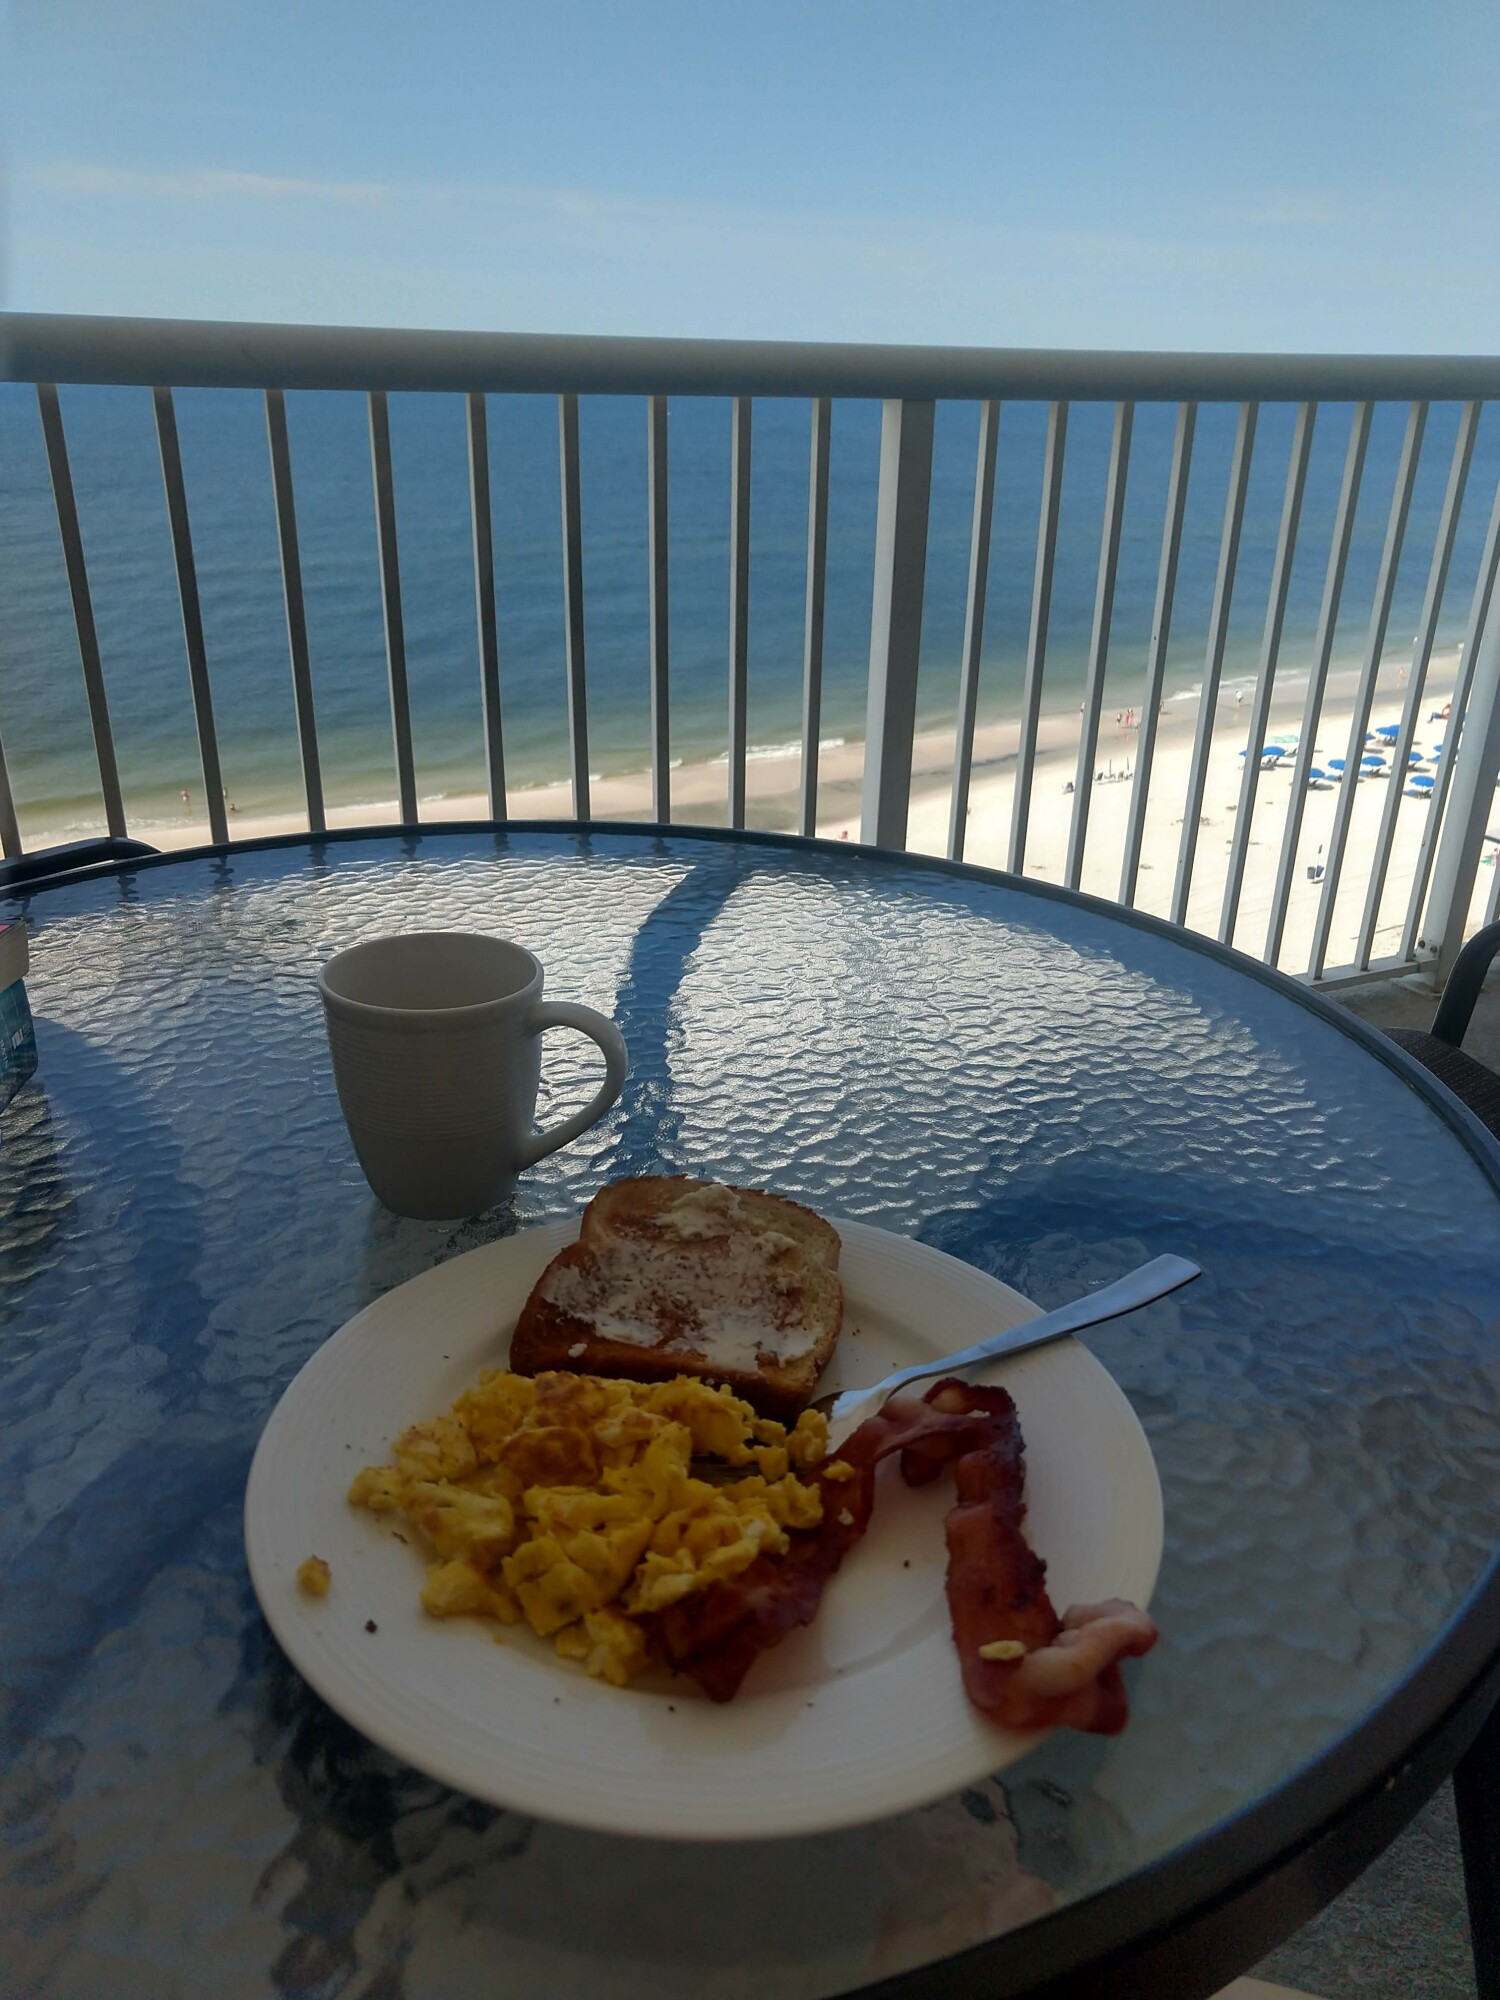 Breakfast on our patio overlooking the beach